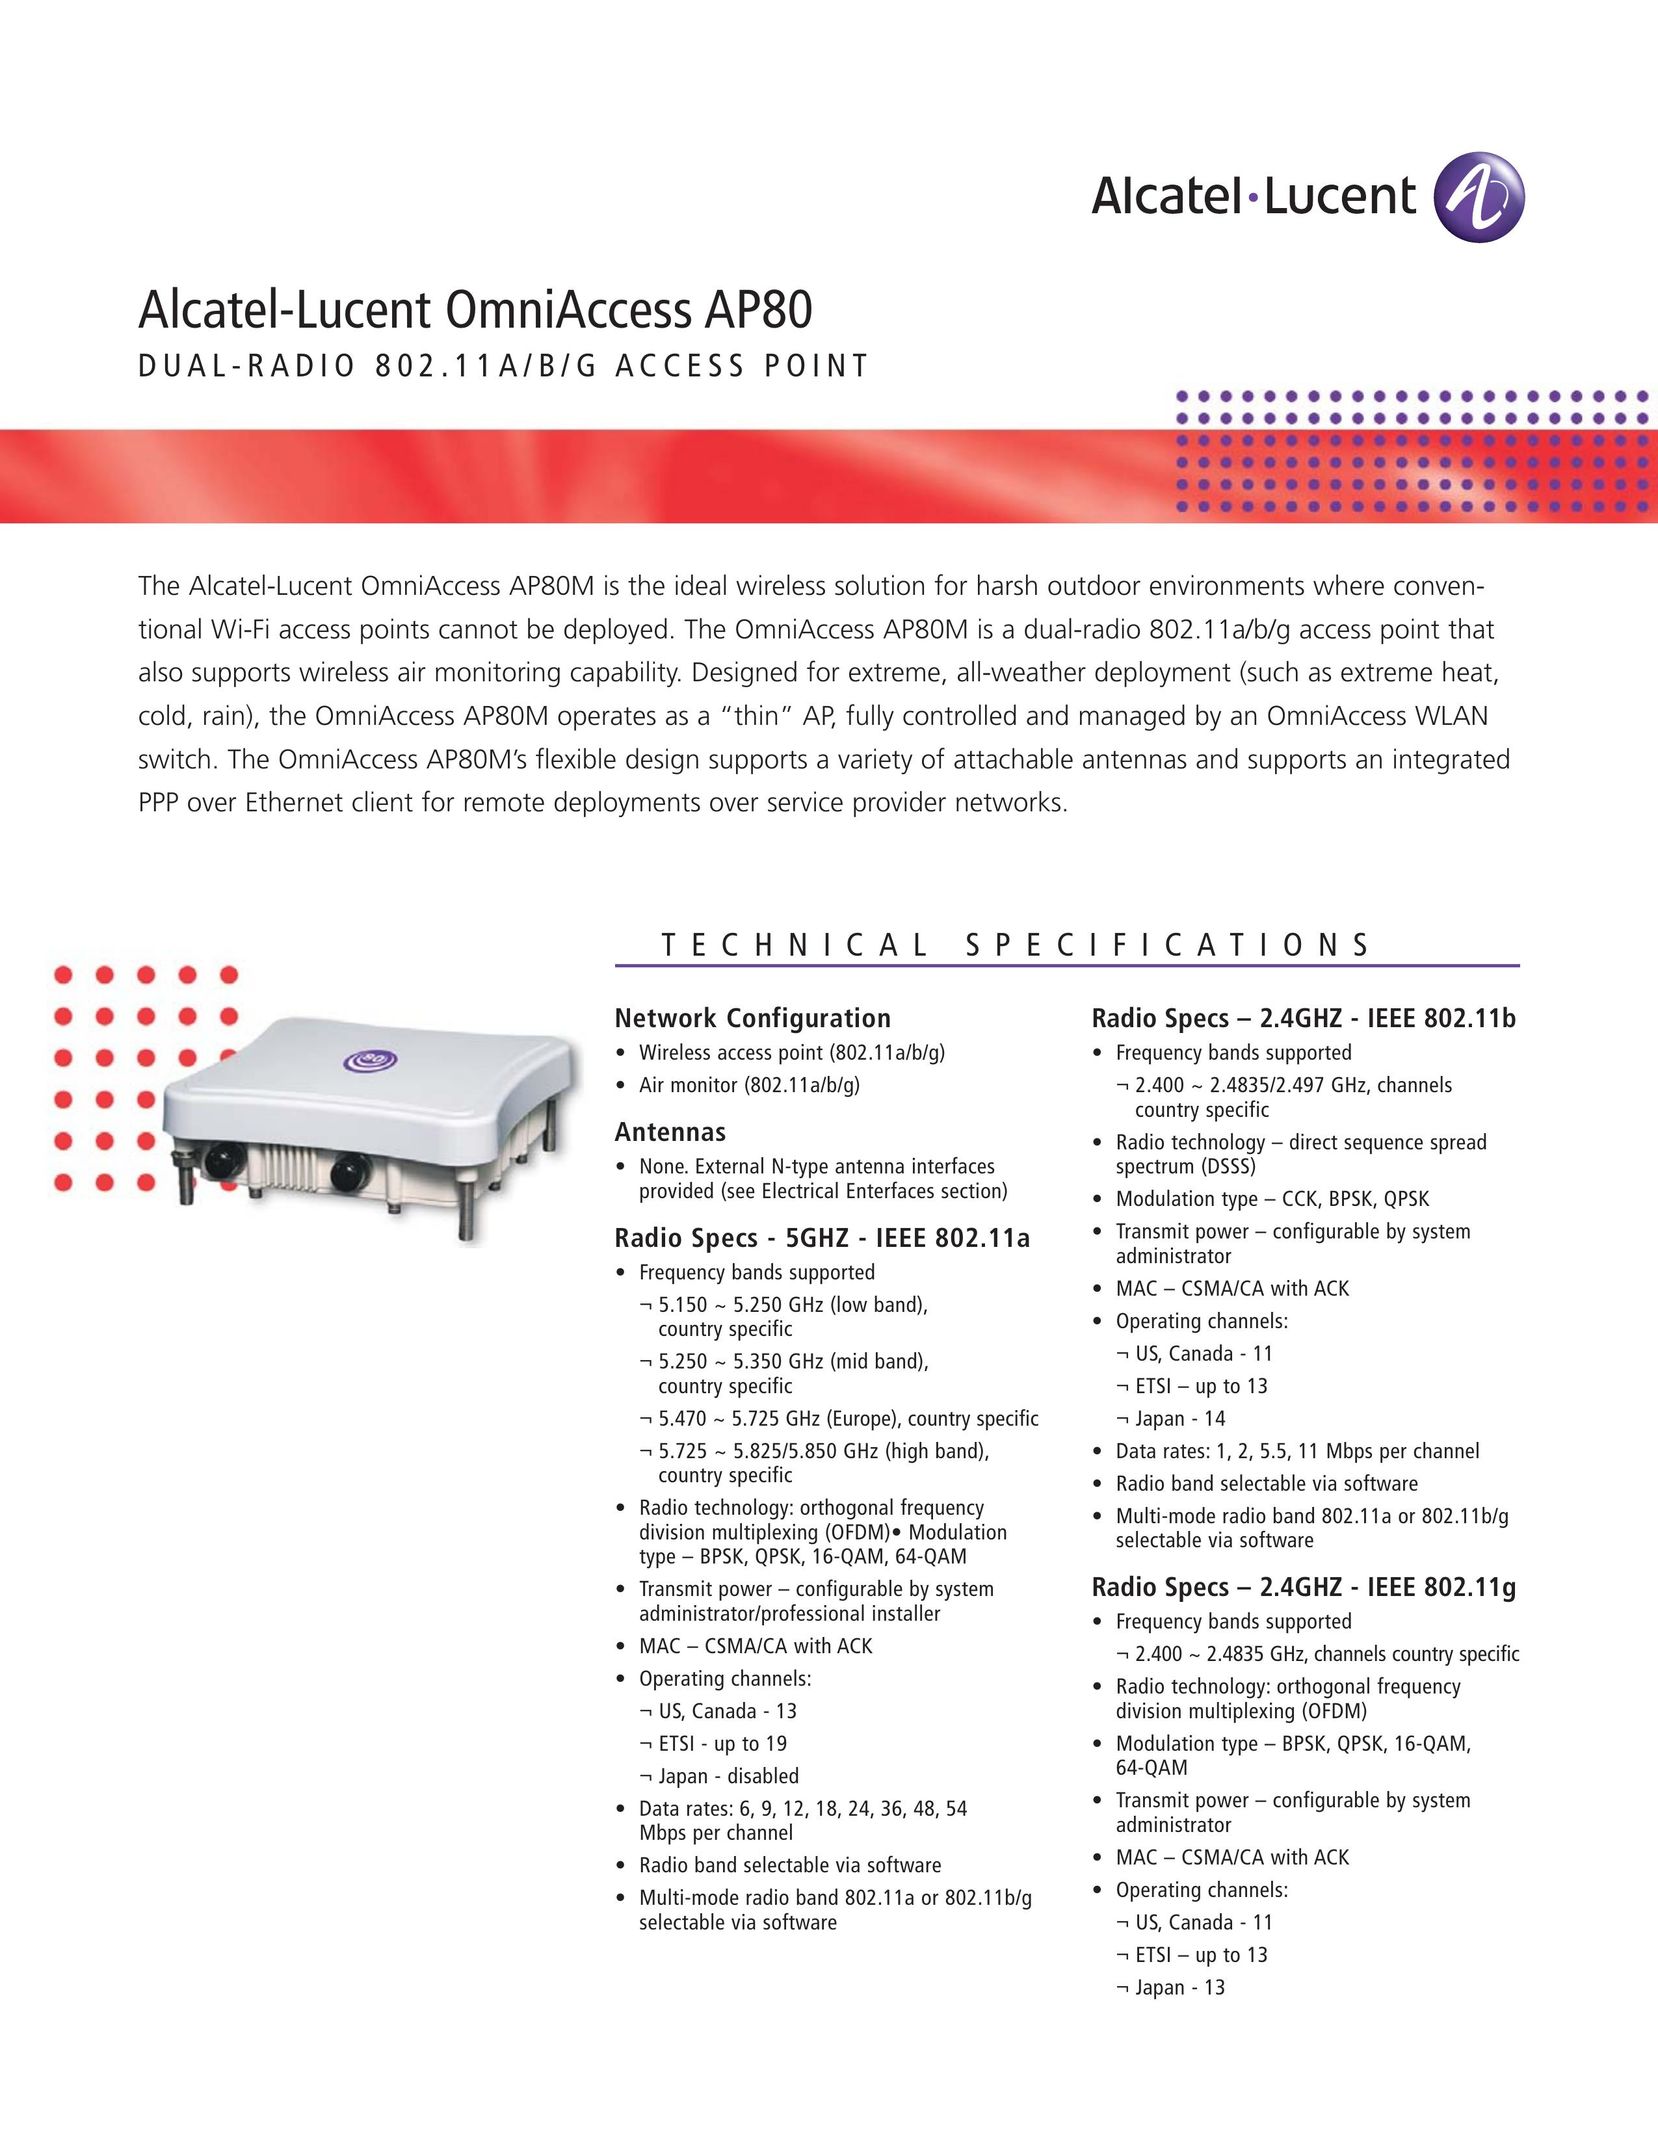 Alcatel-Lucent AP80 Network Card User Manual